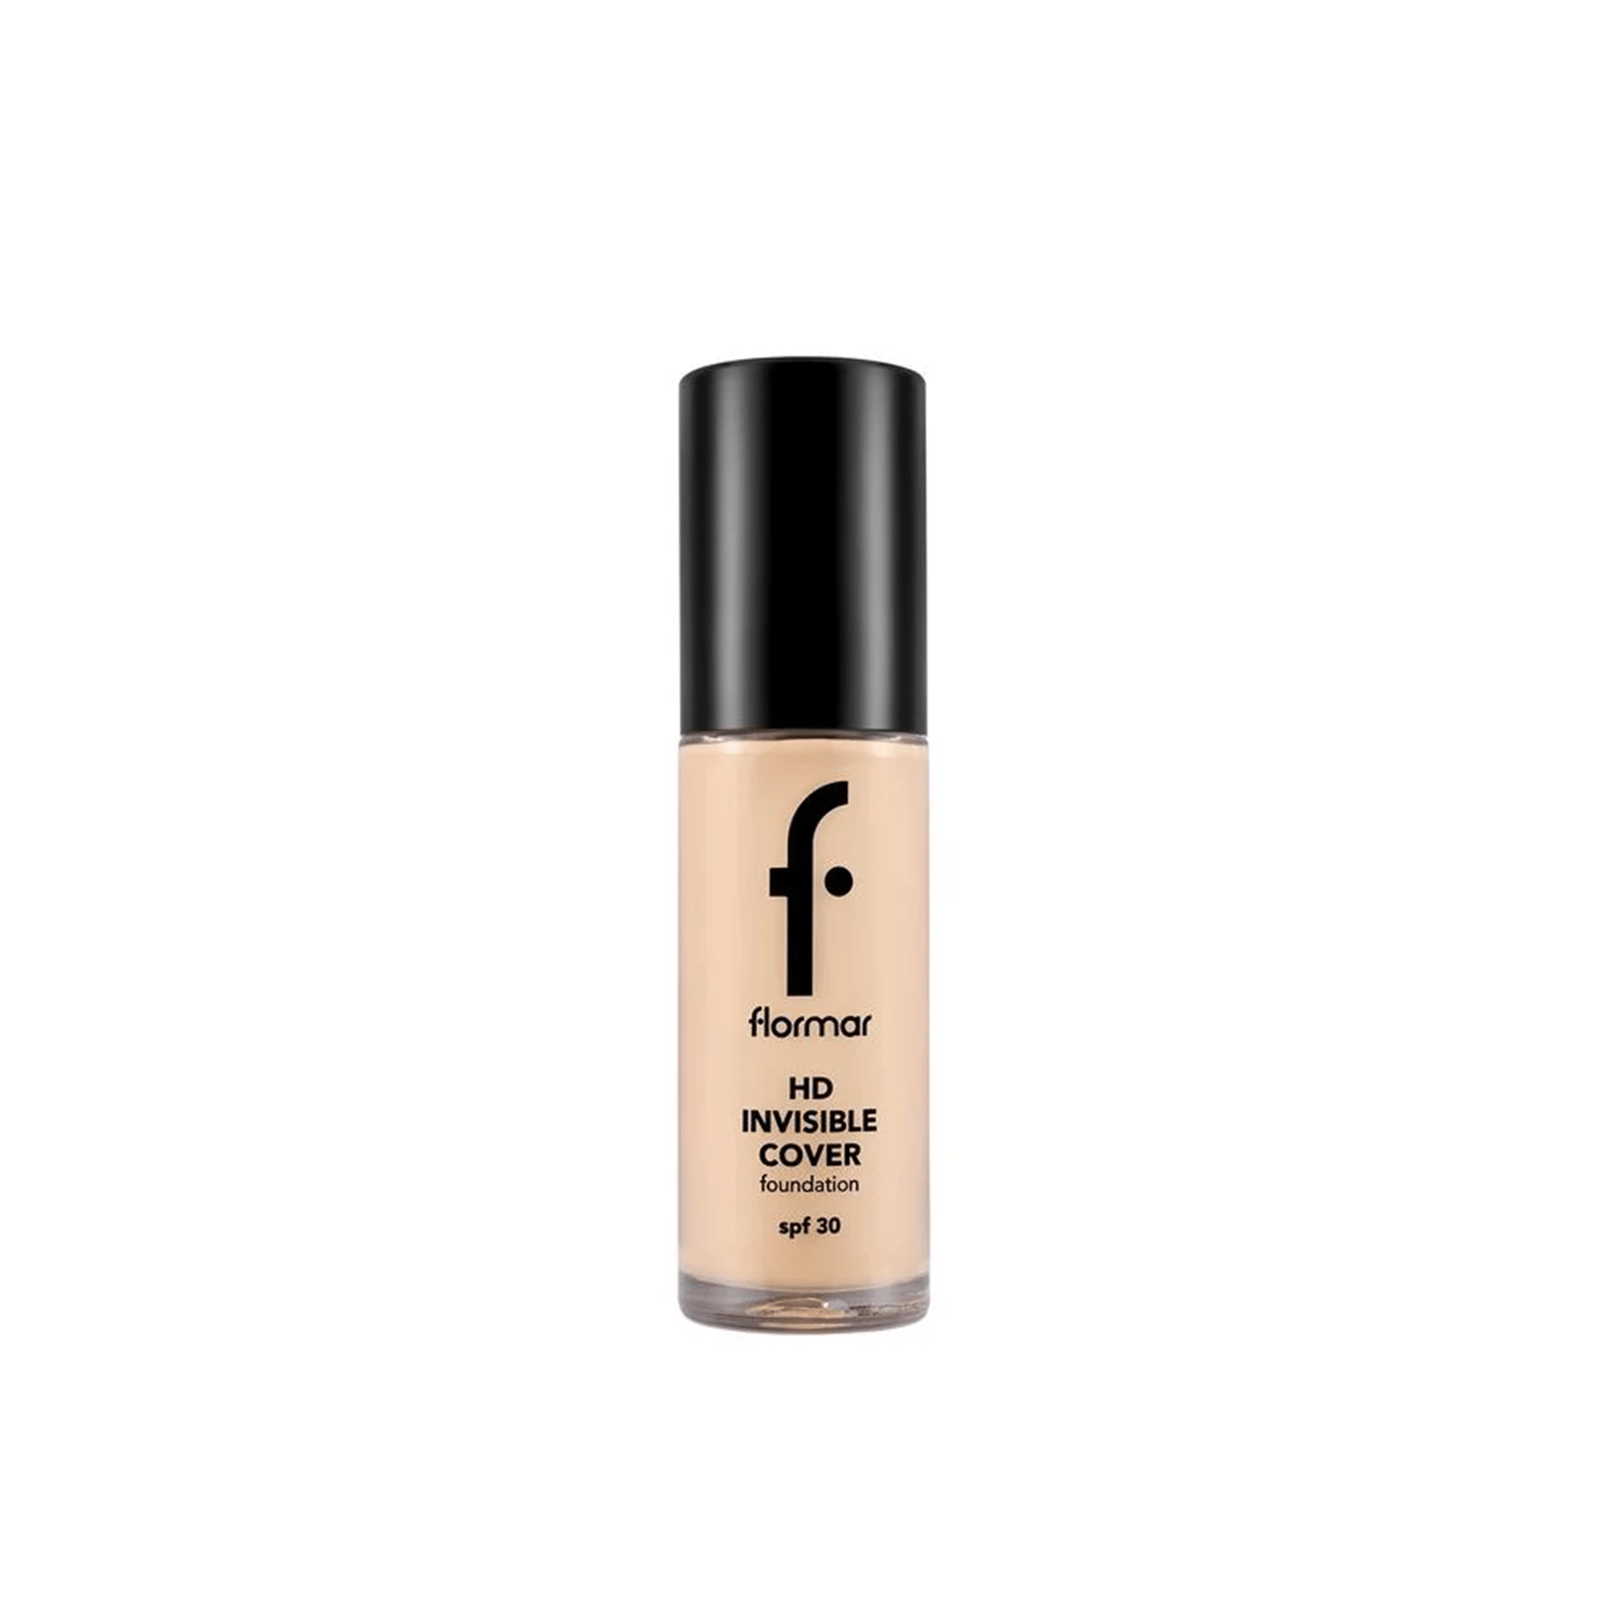 Flormar Invisible Cover HD Foundation SPF30 40 Light Ivory 30ml (1.01floz)